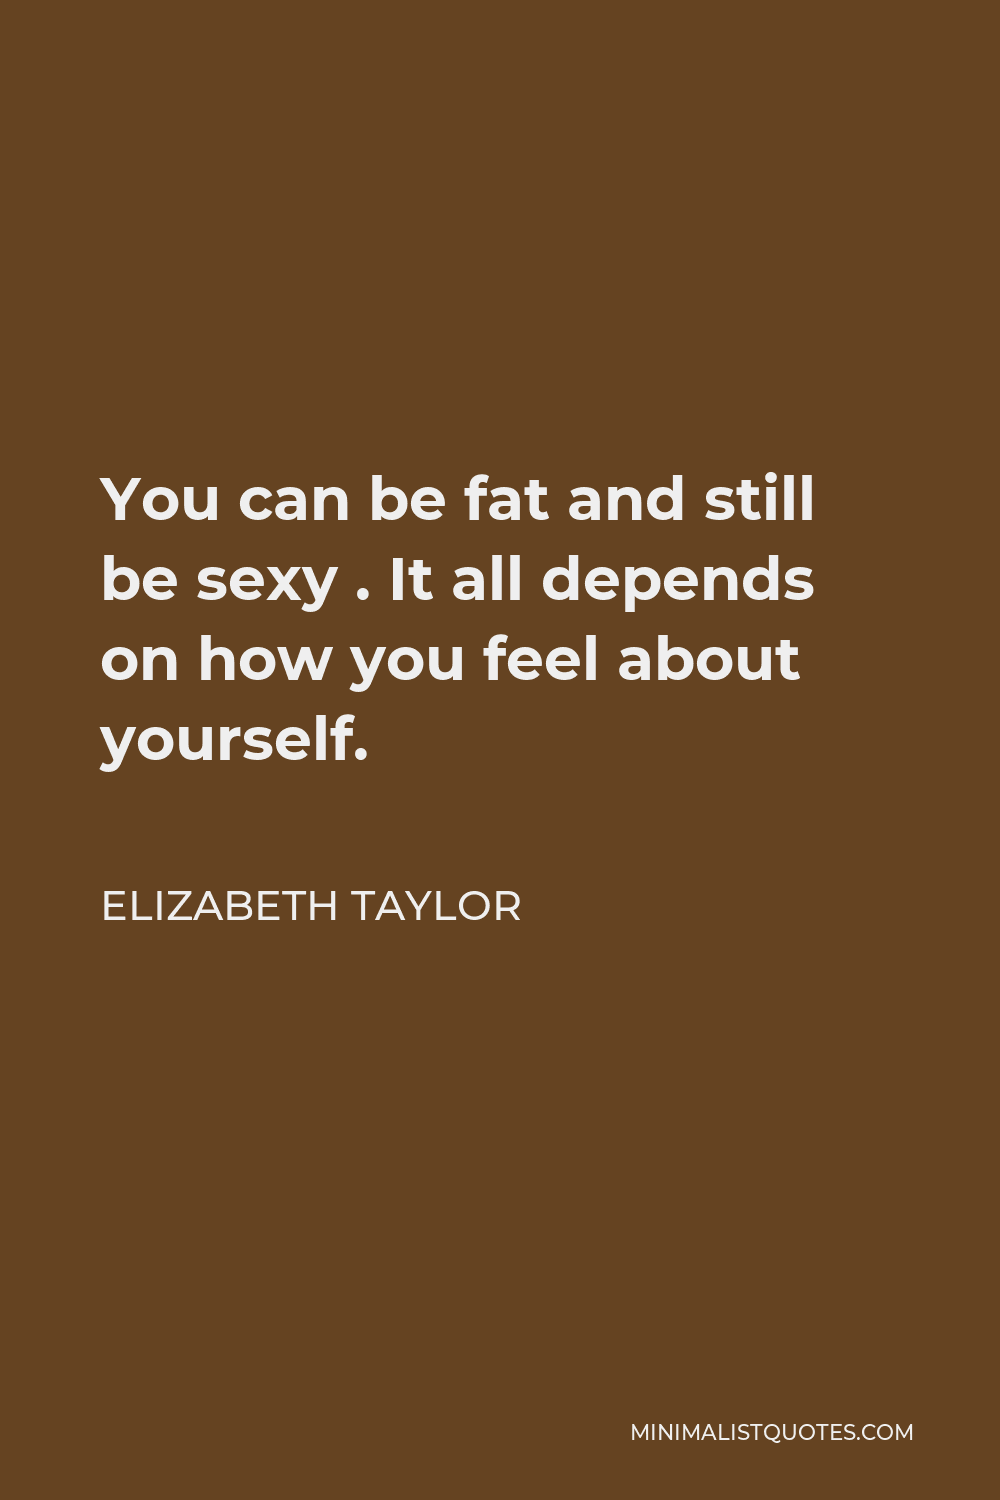 Elizabeth Taylor Quote - You can be fat and still be sexy . It all depends on how you feel about yourself.